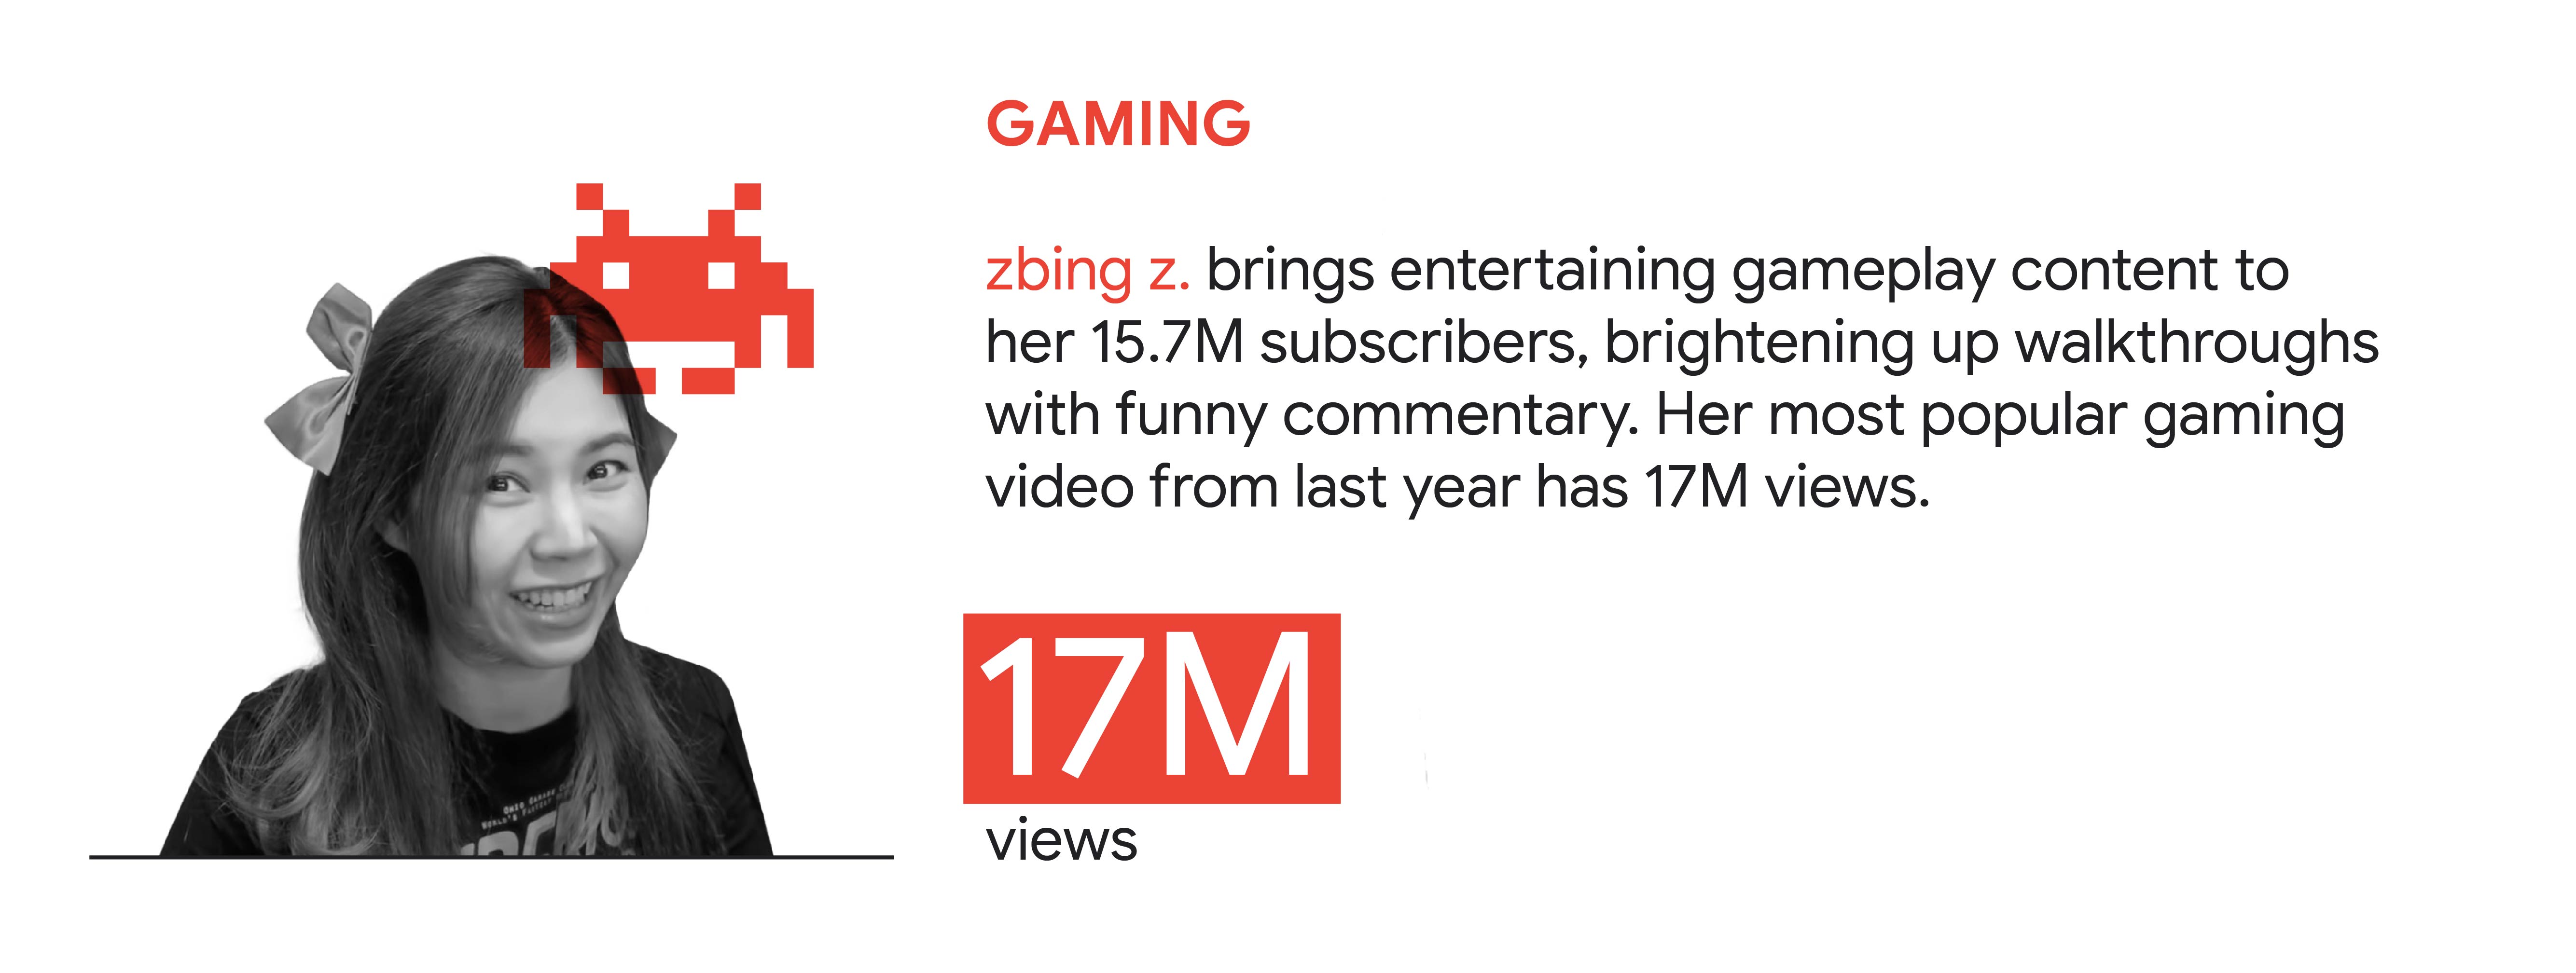 YouTube trend 3: Gaming. In Thailand, zbing.z brings entertaining gameplay content to her 15.7M subscribers, brightening up walkthroughs with funny commentary. Her most popular gaming video from last year has 17M views.